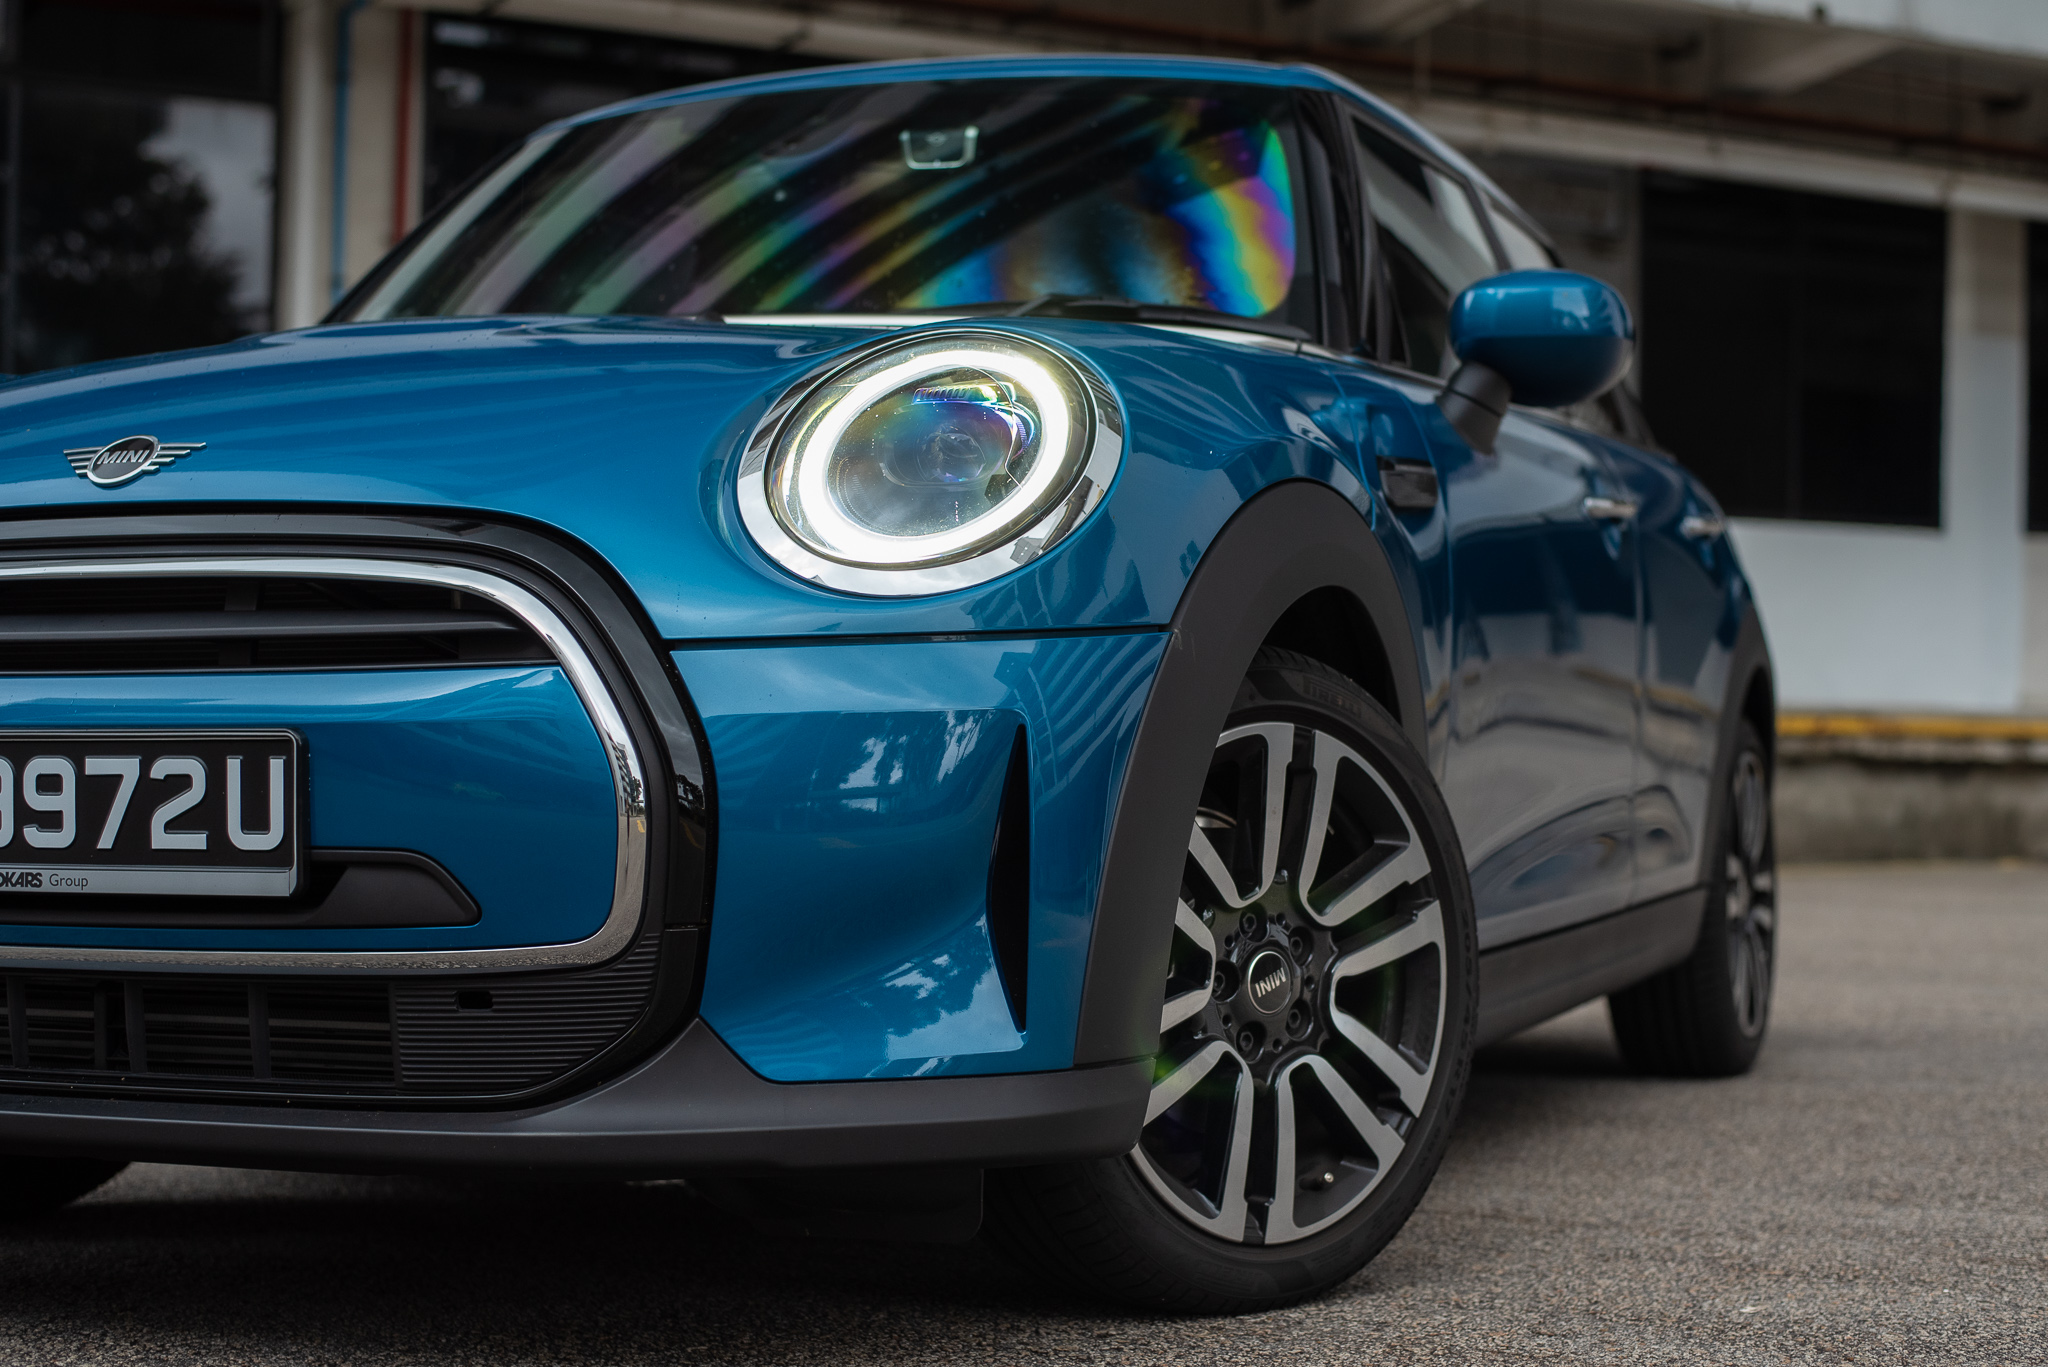 2021 MINI One 5-Door review by Jay Tee | TopGear Singapore